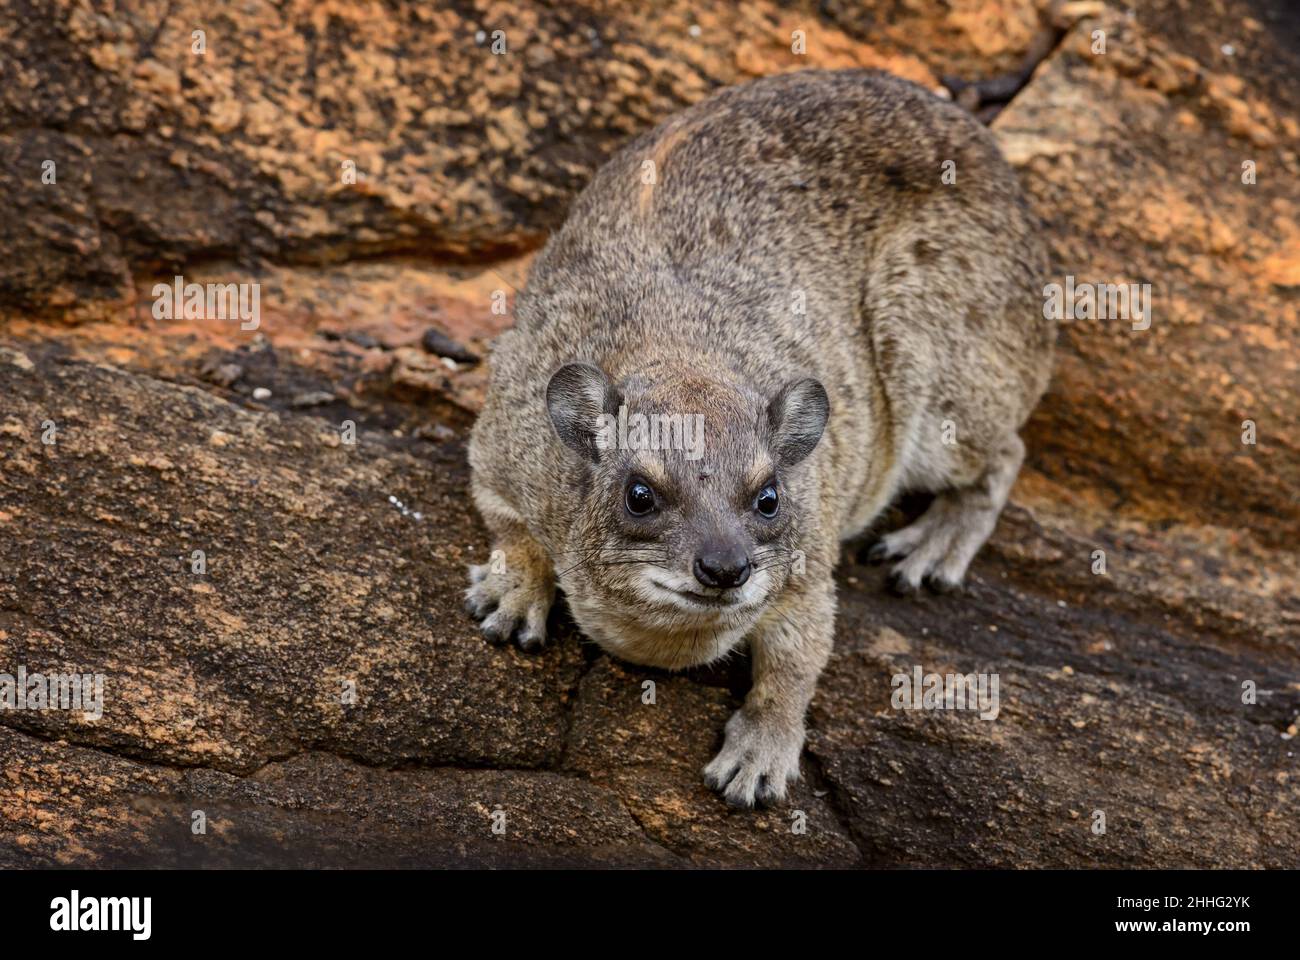 Common Rock Hyrax - Procavia capensis, small mammal from African hillls and mountains, Tsavo East, Kenya. Stock Photo